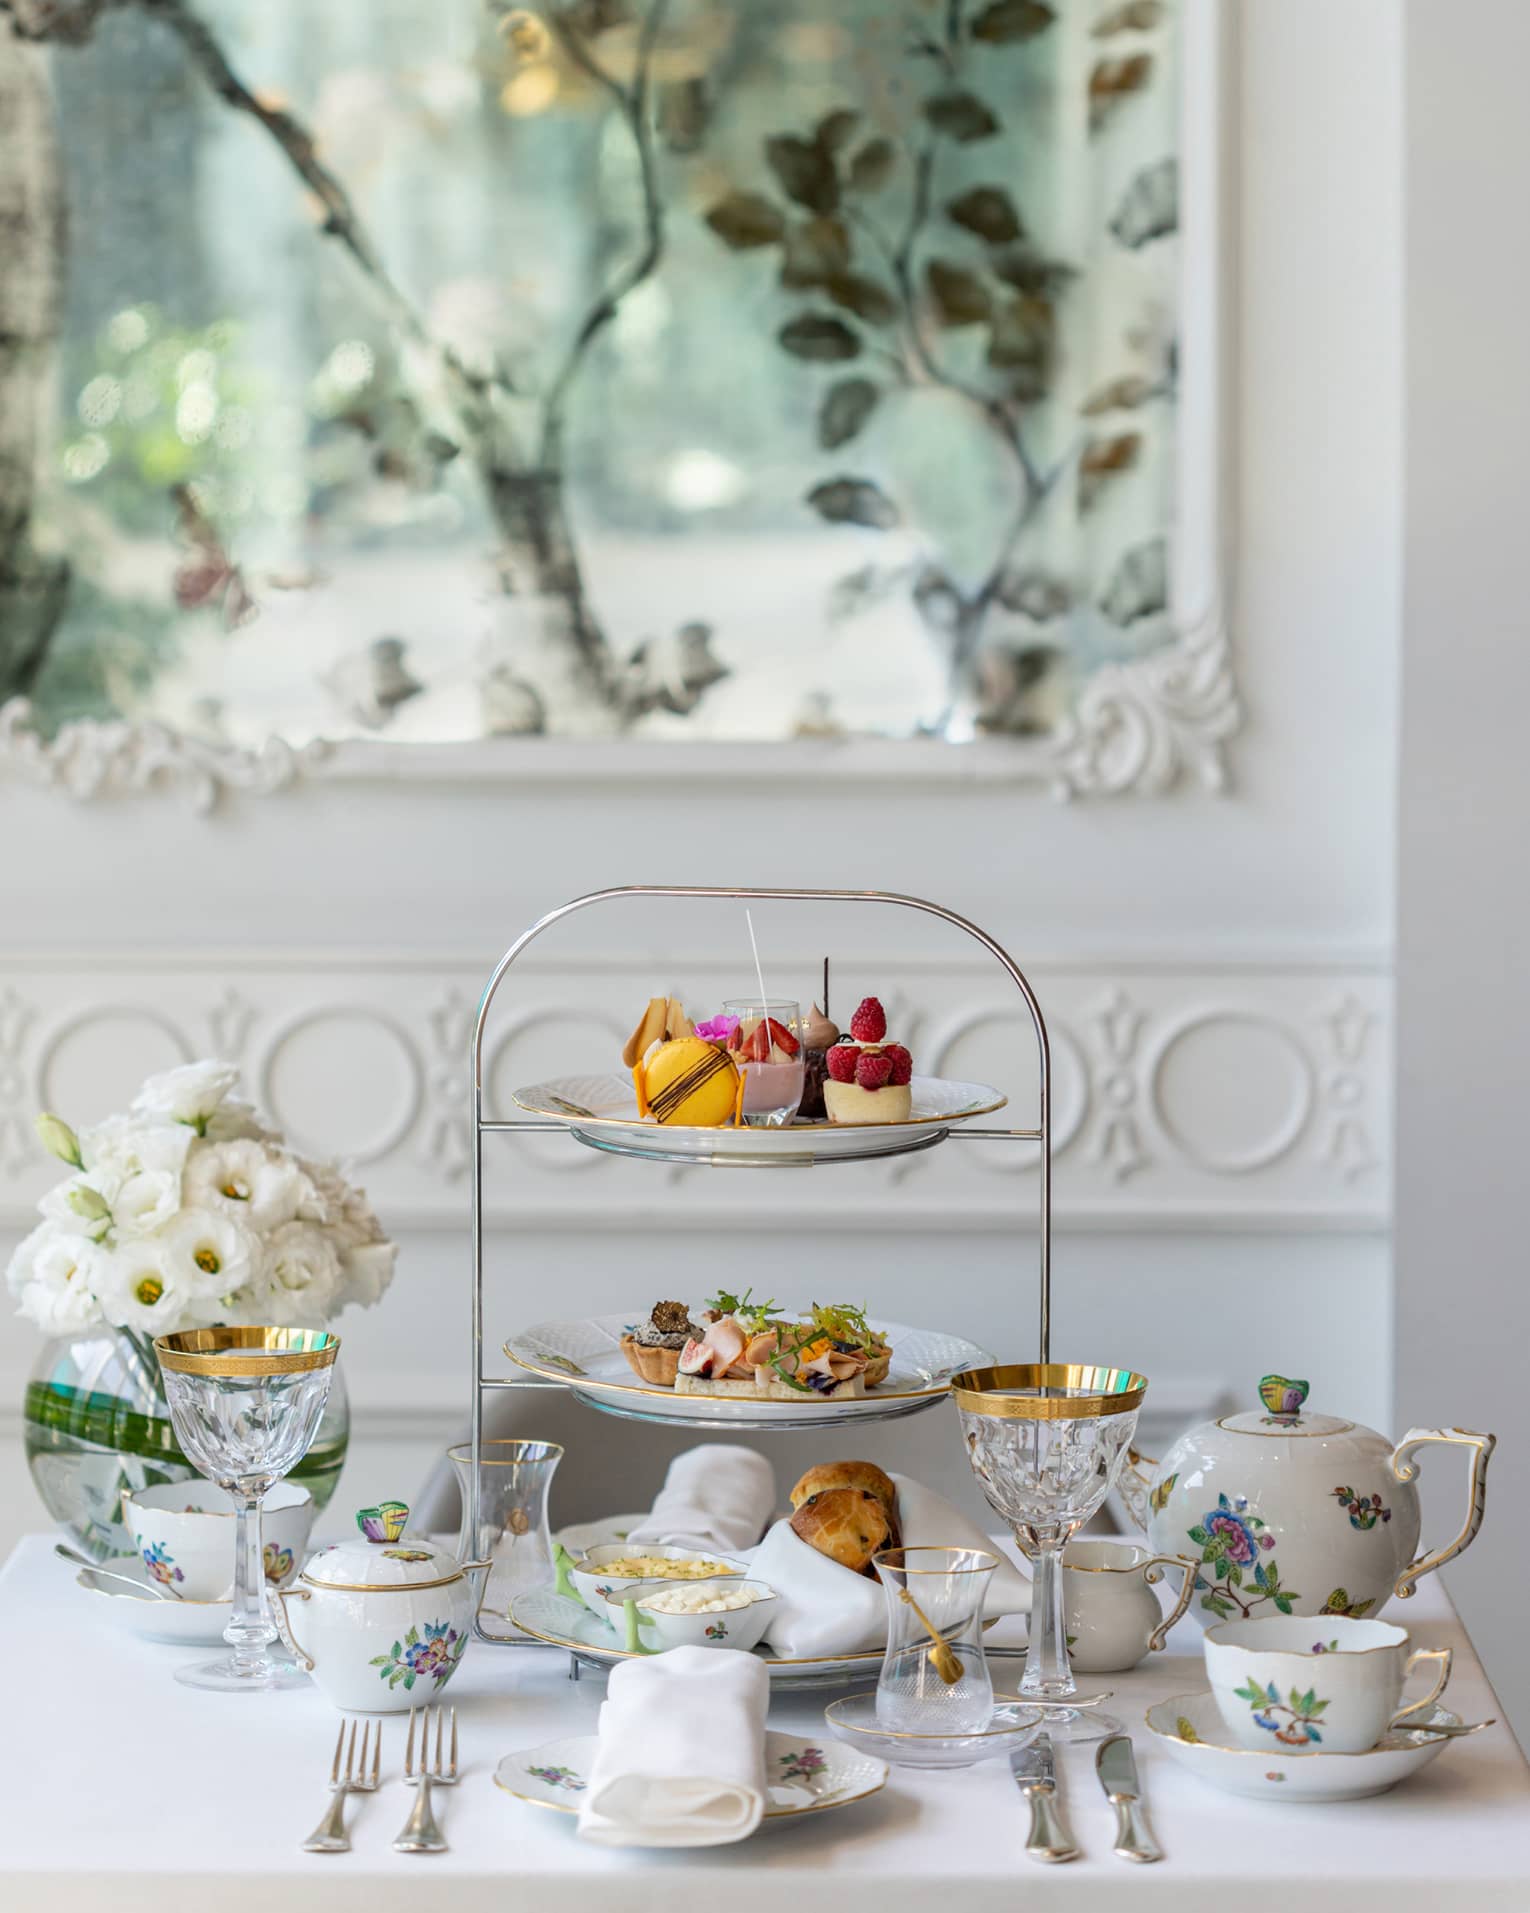 An afternoon tea set with pastries on trays and tea cups.